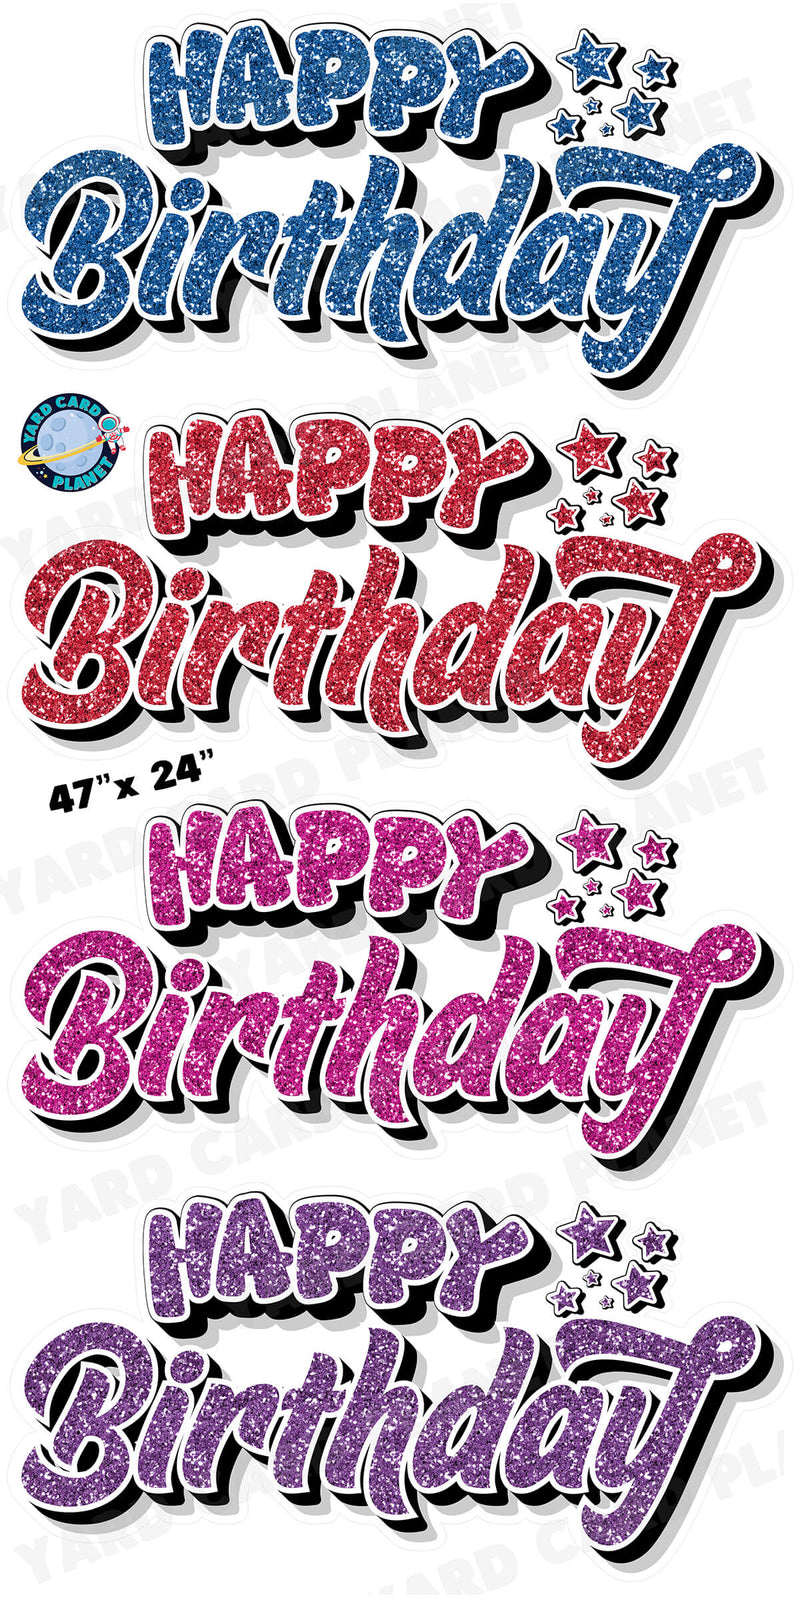 Happy Birthday EZ Quick Signs in Glitter Blue, Red, Hot Pink and Purple Yard Card Set